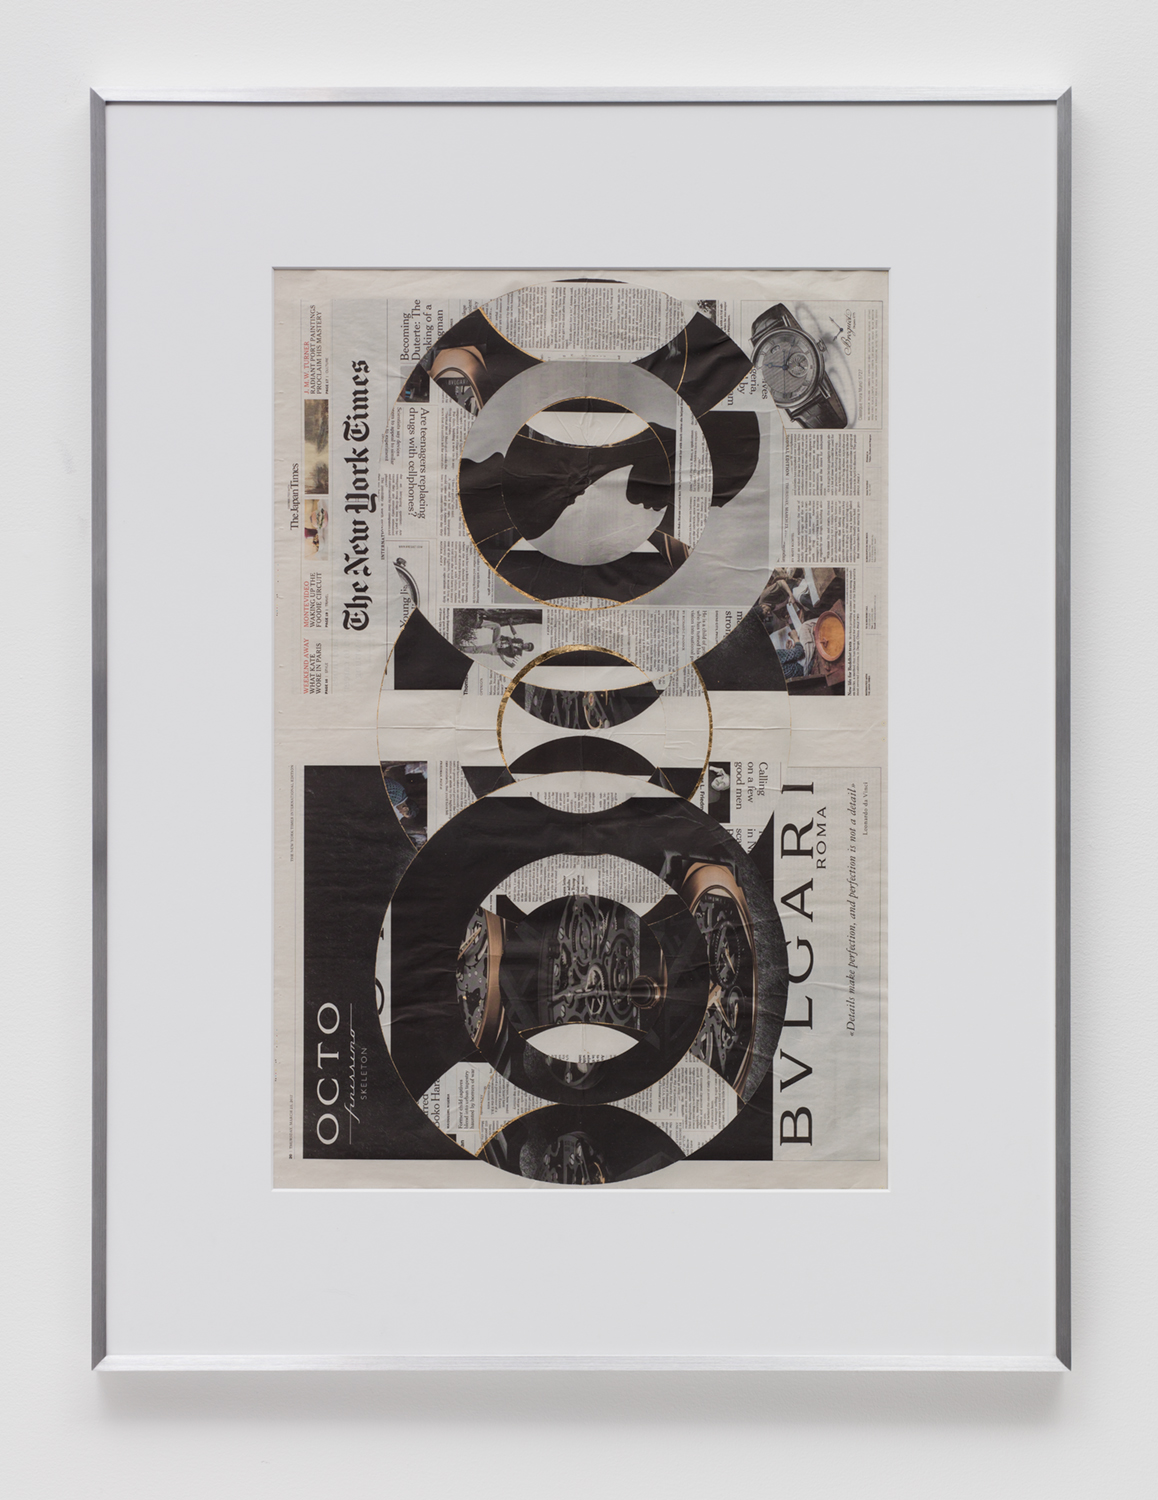   Blind Collage (Three 180º Rotations, The New York Times International Edition Distributed with The Japan Times, Thursday, March 23, 2017)   2017  Newspaper, tape, and 22 karat gold leaf  43 5/8 x 33 1/8 inches   Blind Collages, 2017–   Exhibition: 